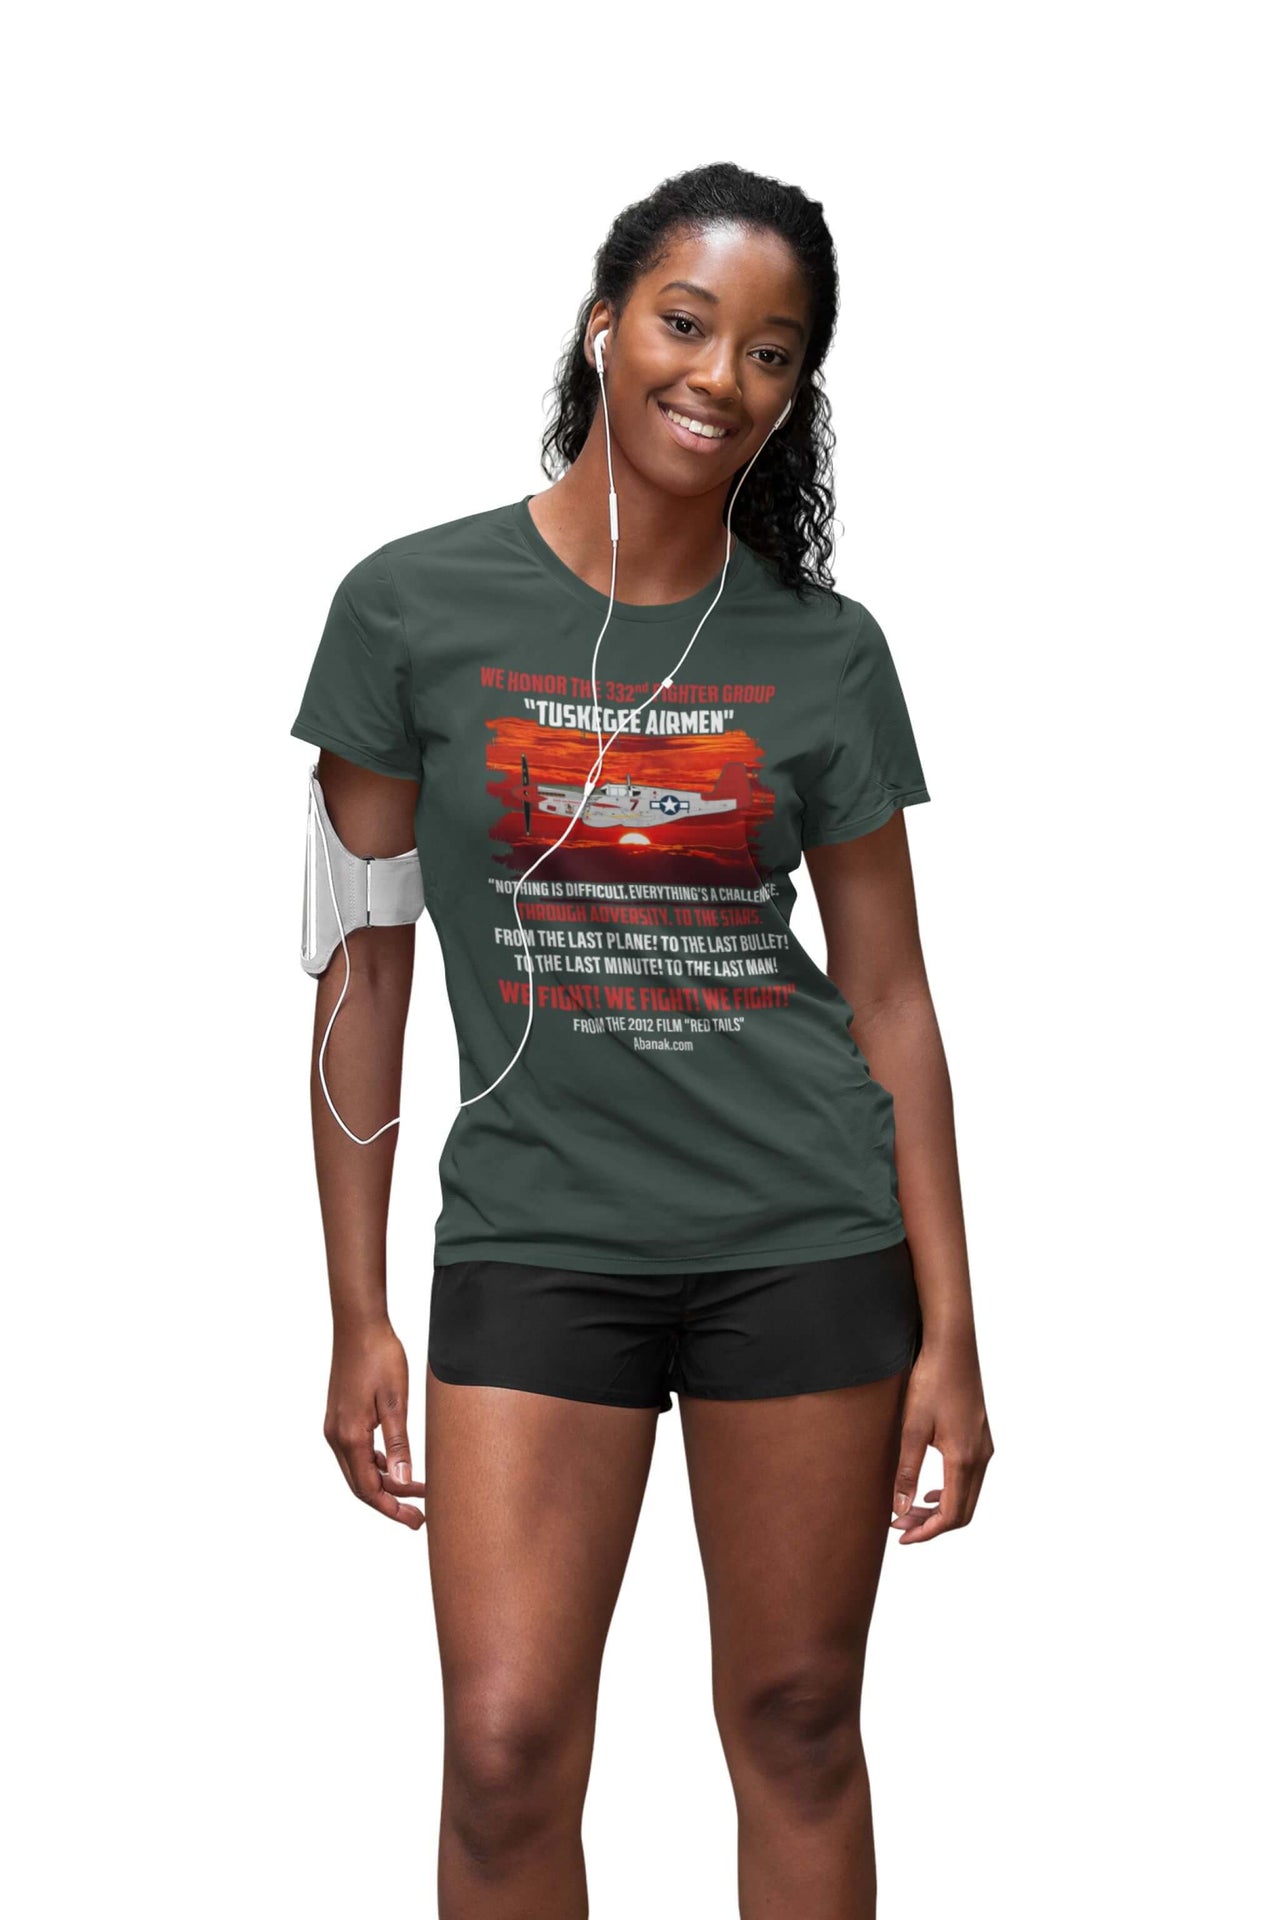 We Fight, We Fight, We Fight - Red Tails Inspirational Quote - Women's Vintage Tee